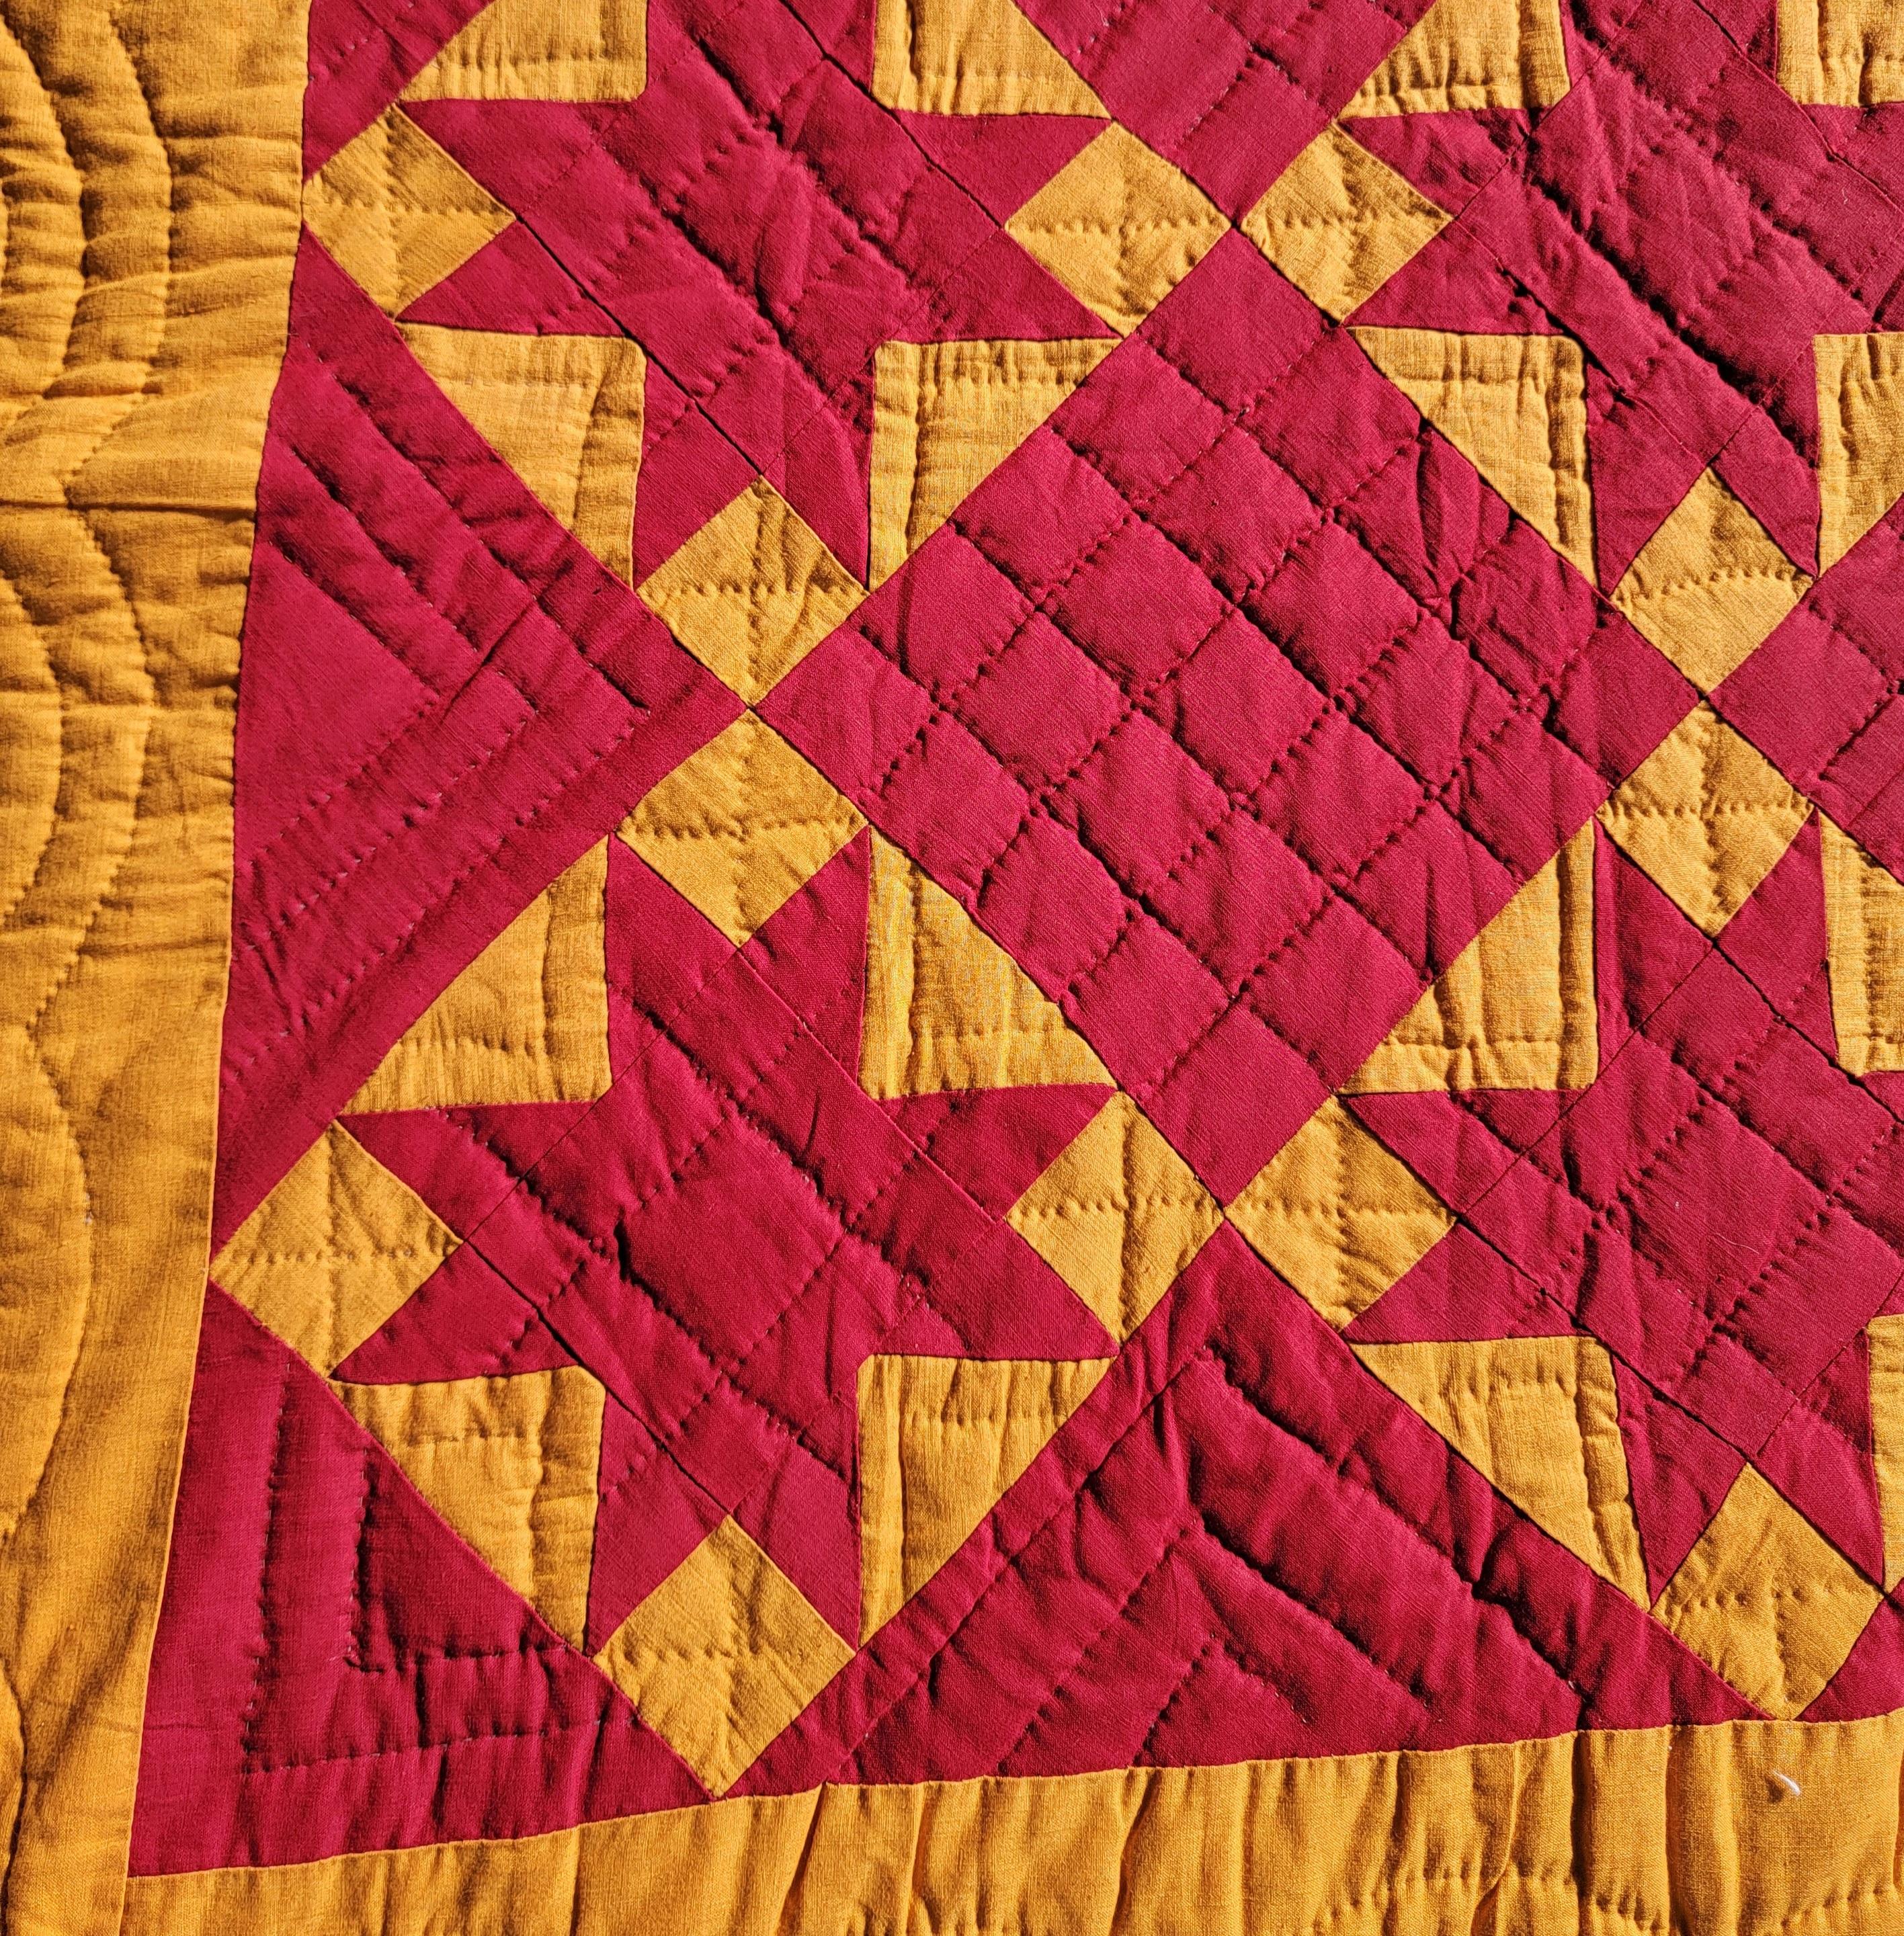 19thc red stars on a cheddar orange ground. This Mennonite quilt is in fine as found condition. It was found in Berks County, Pennsylvania.